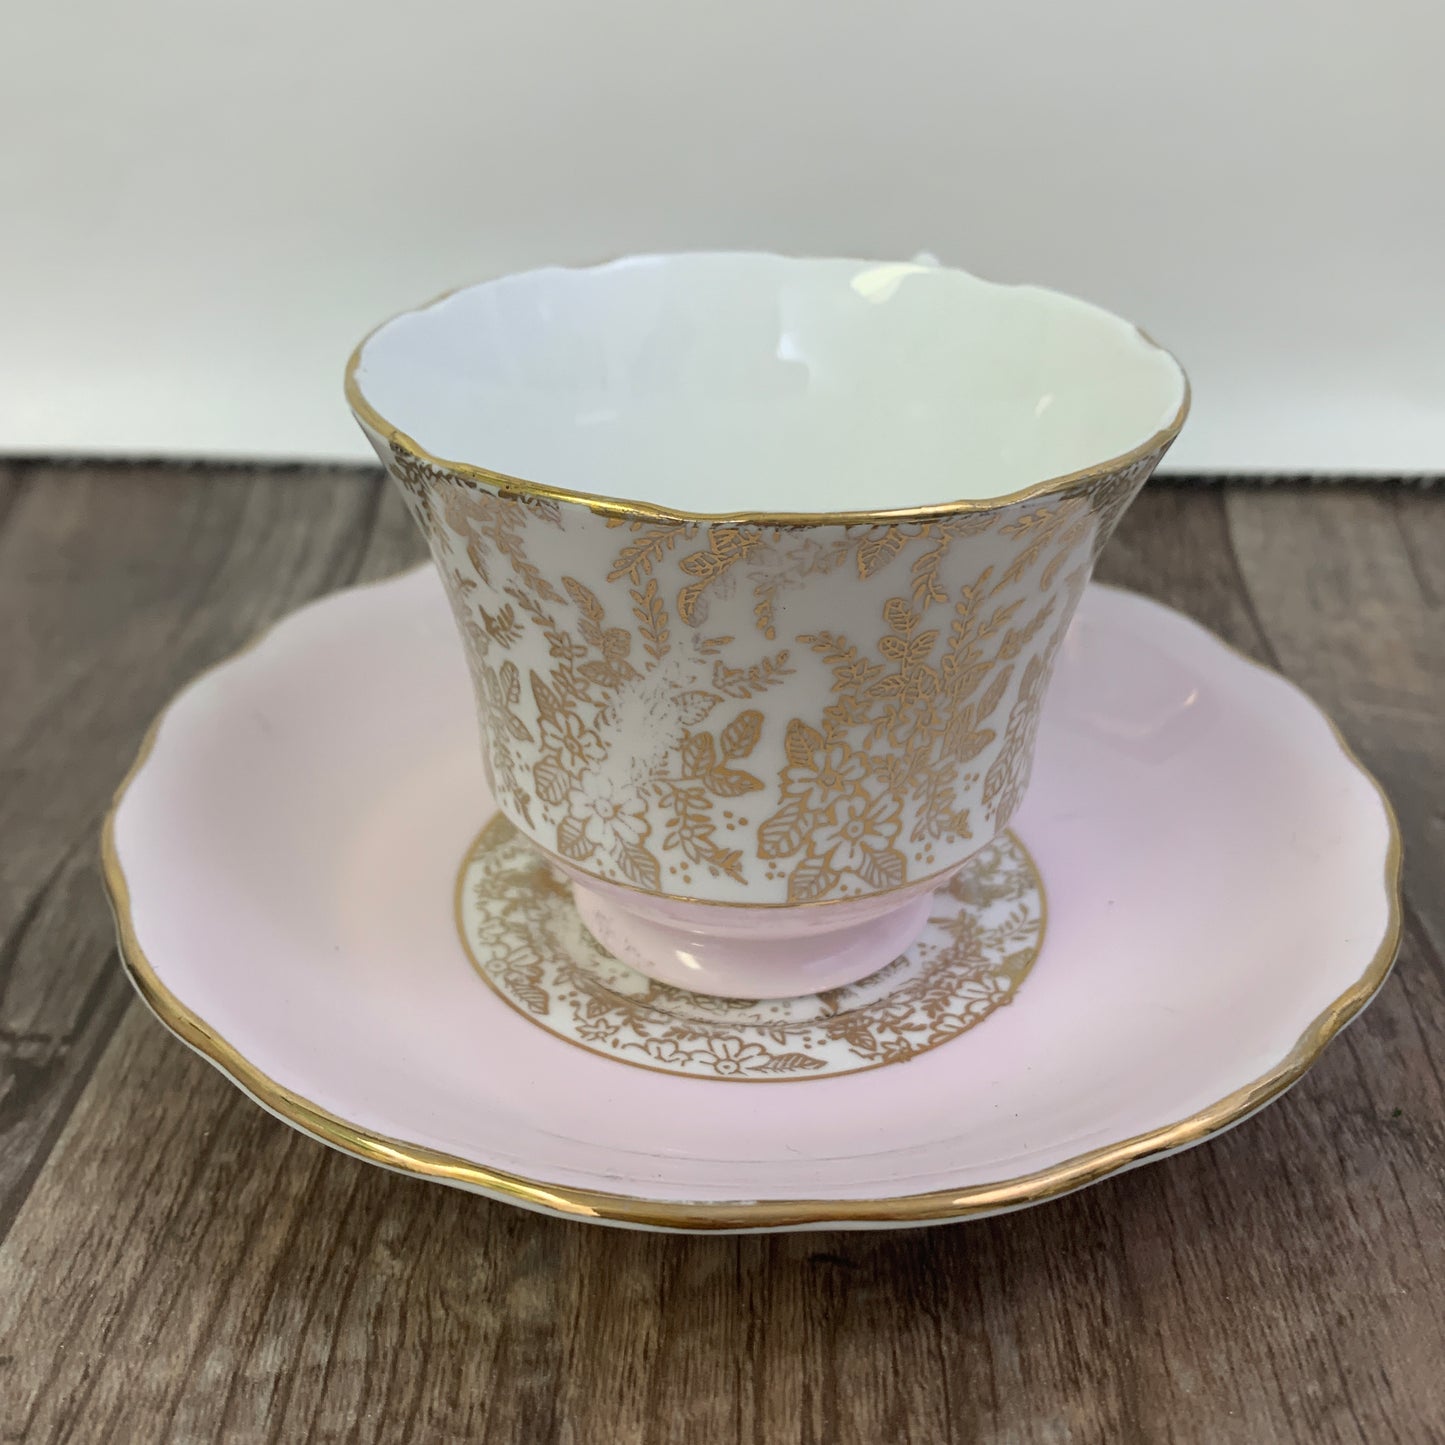 Pink and White Vintage Teacup with Gold Design, Royal Vale English Tea Cup